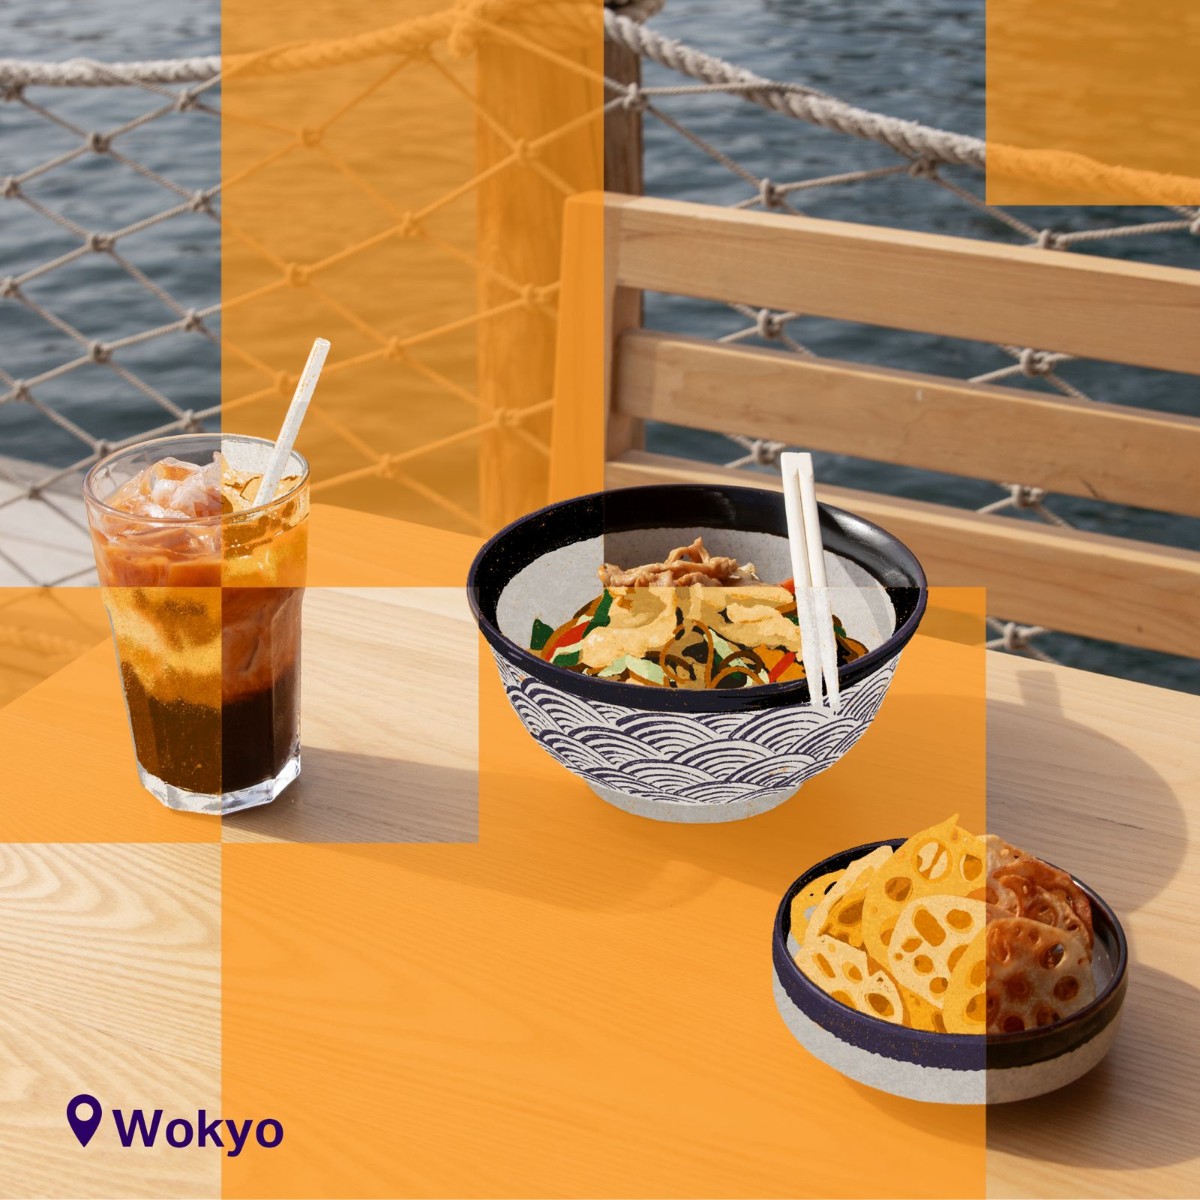 Savor Wokyo's signature dishes at Al Seef during Dubai Food Festival! Taste the best in town and embark on a flavor-filled journey you won't forget.​

#AlSeefDubai #DubaiEats #DubaiFoodFestival #ThingsToDo #Wokyo